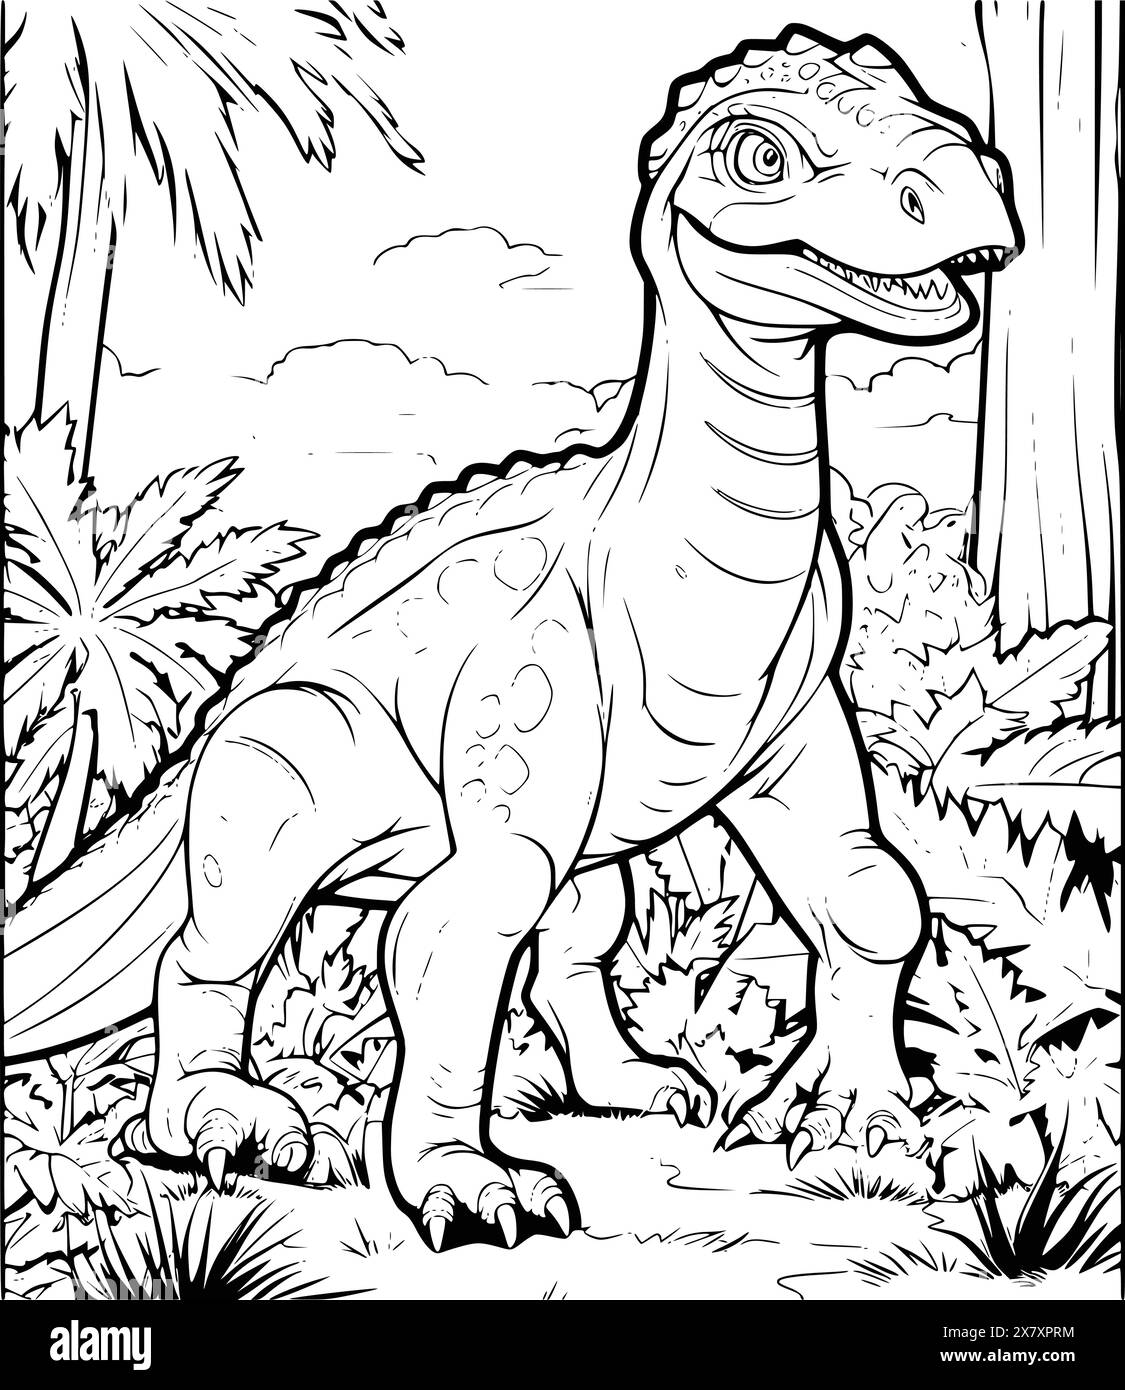 Dinosaur In A Jungle Coloring Page For Kids Stock Vector